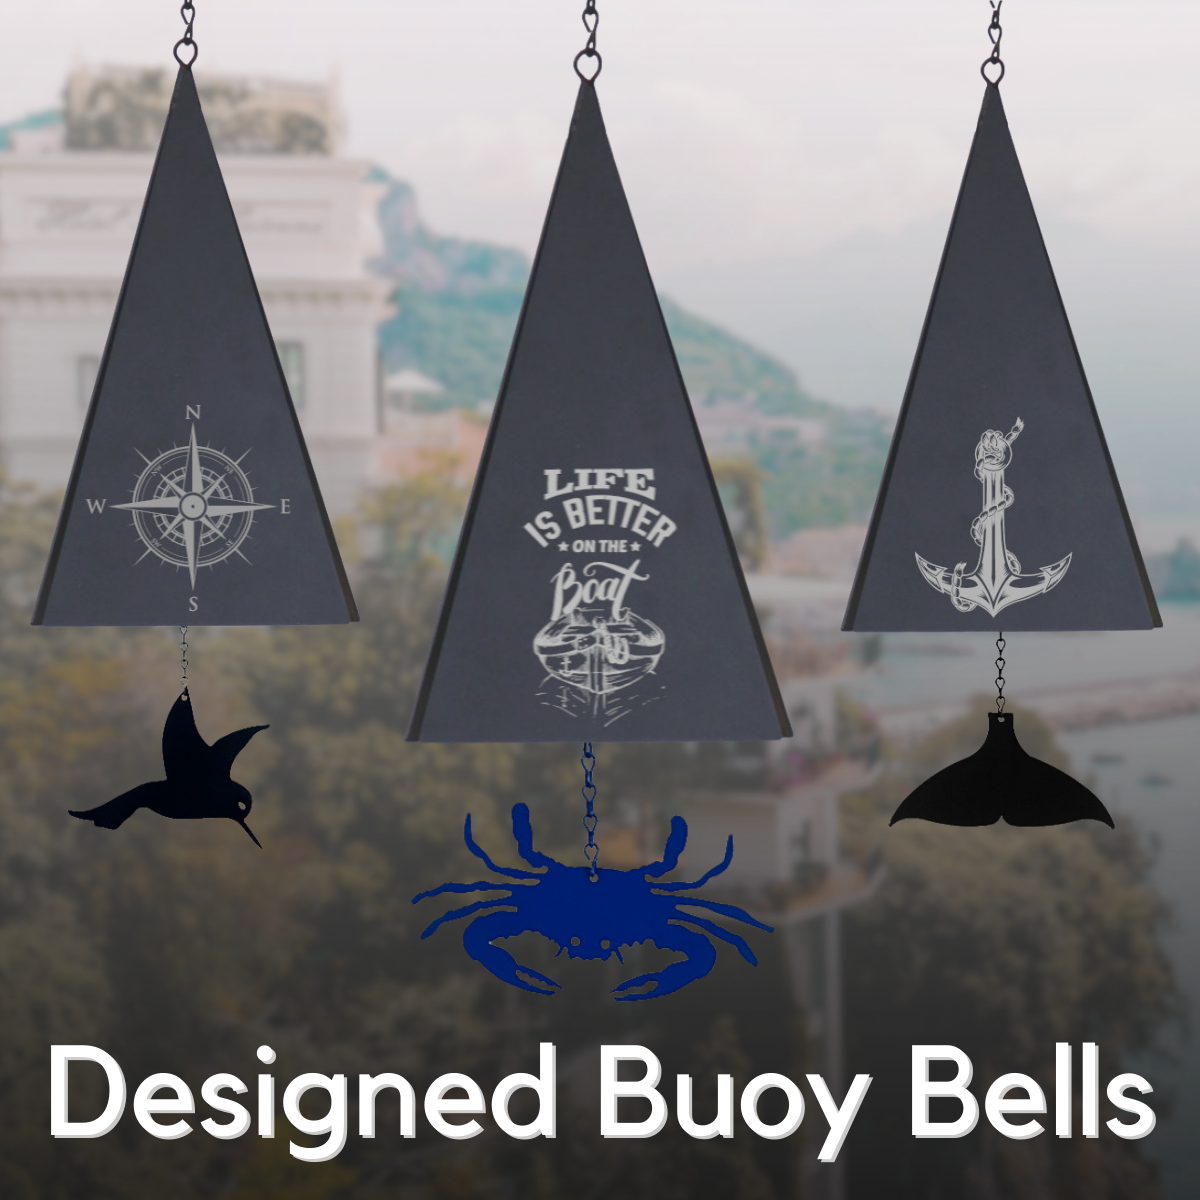 Browse Our Collection of Buoy Bells With Engraved Designs!